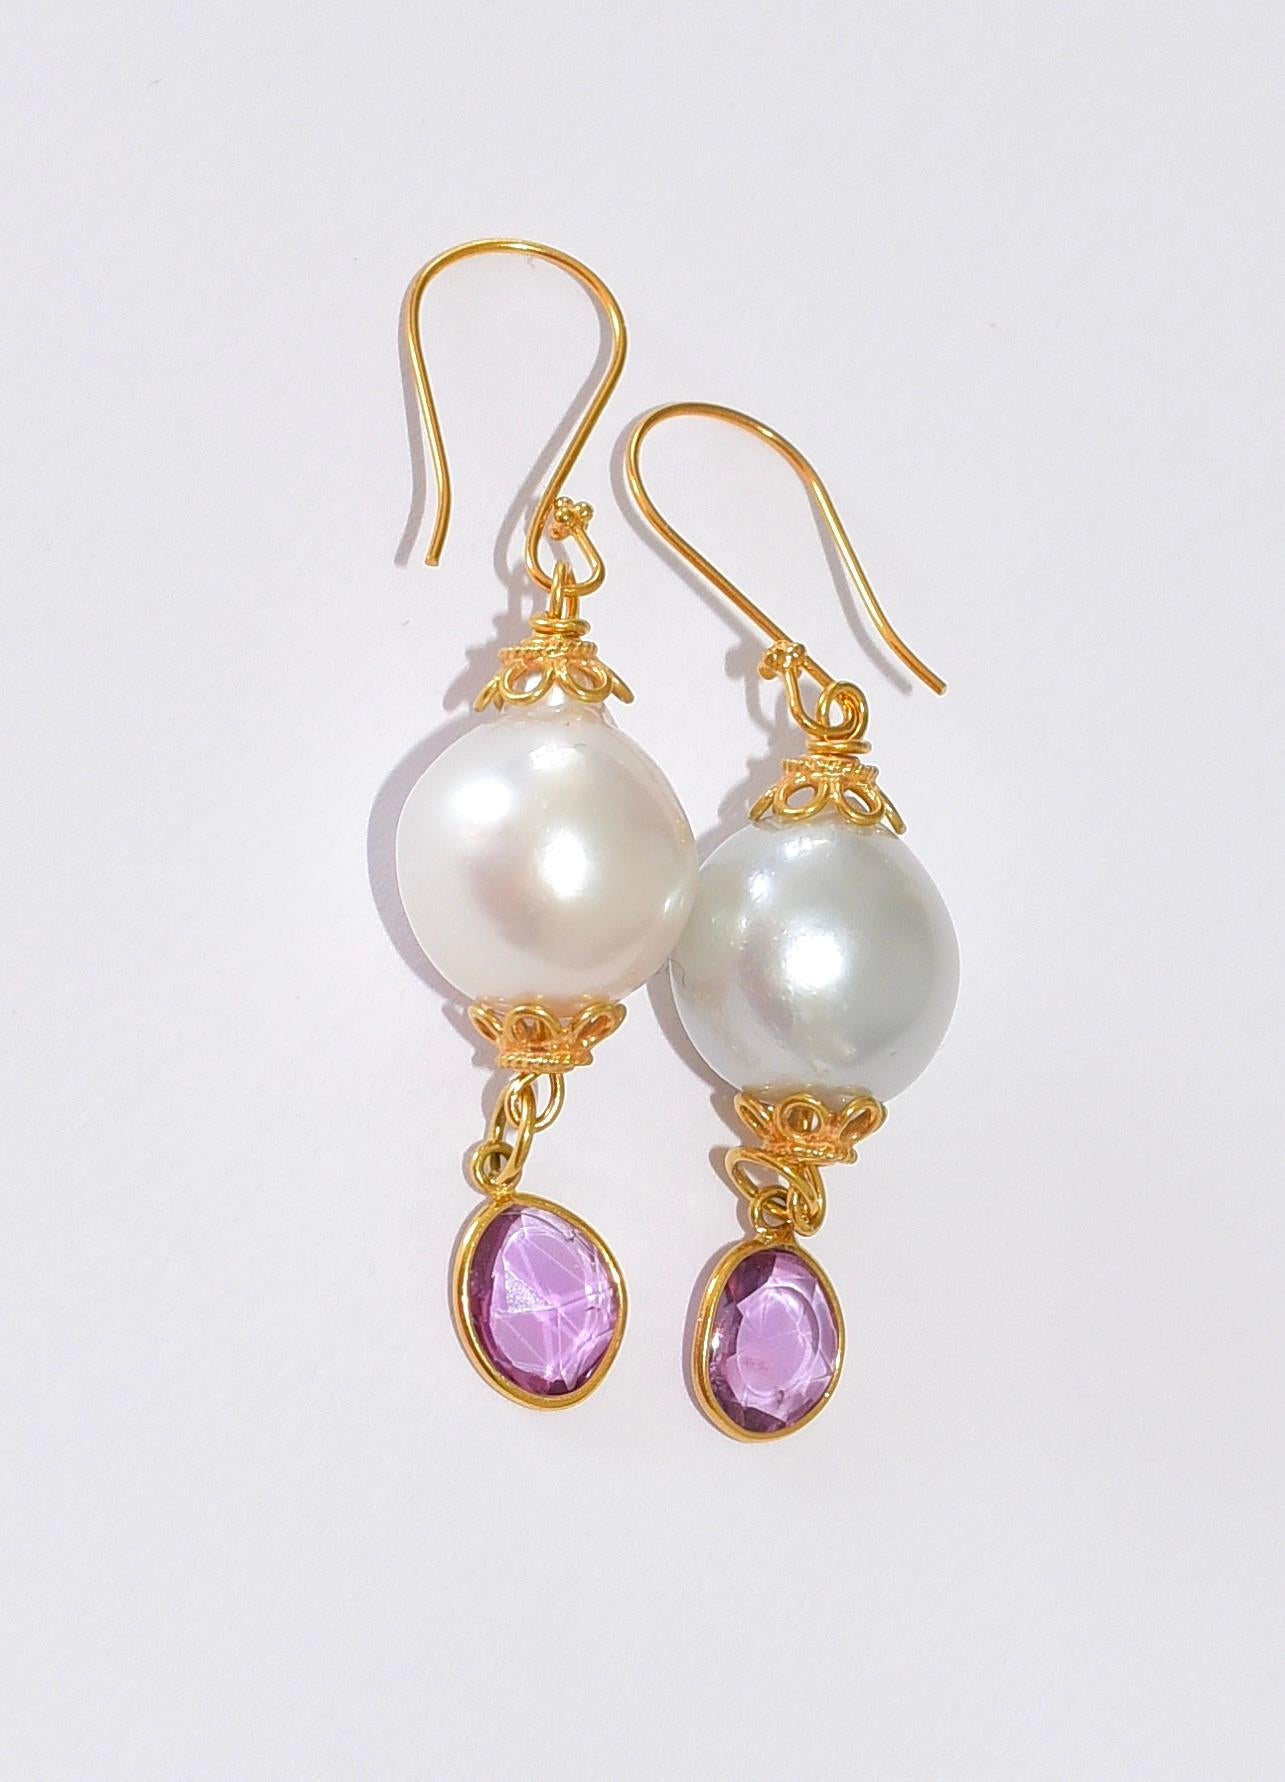 Rose Cut White South Sea Pearl, Natural Pink Sapphire Earrings in 18K Solid Yellow Gold For Sale